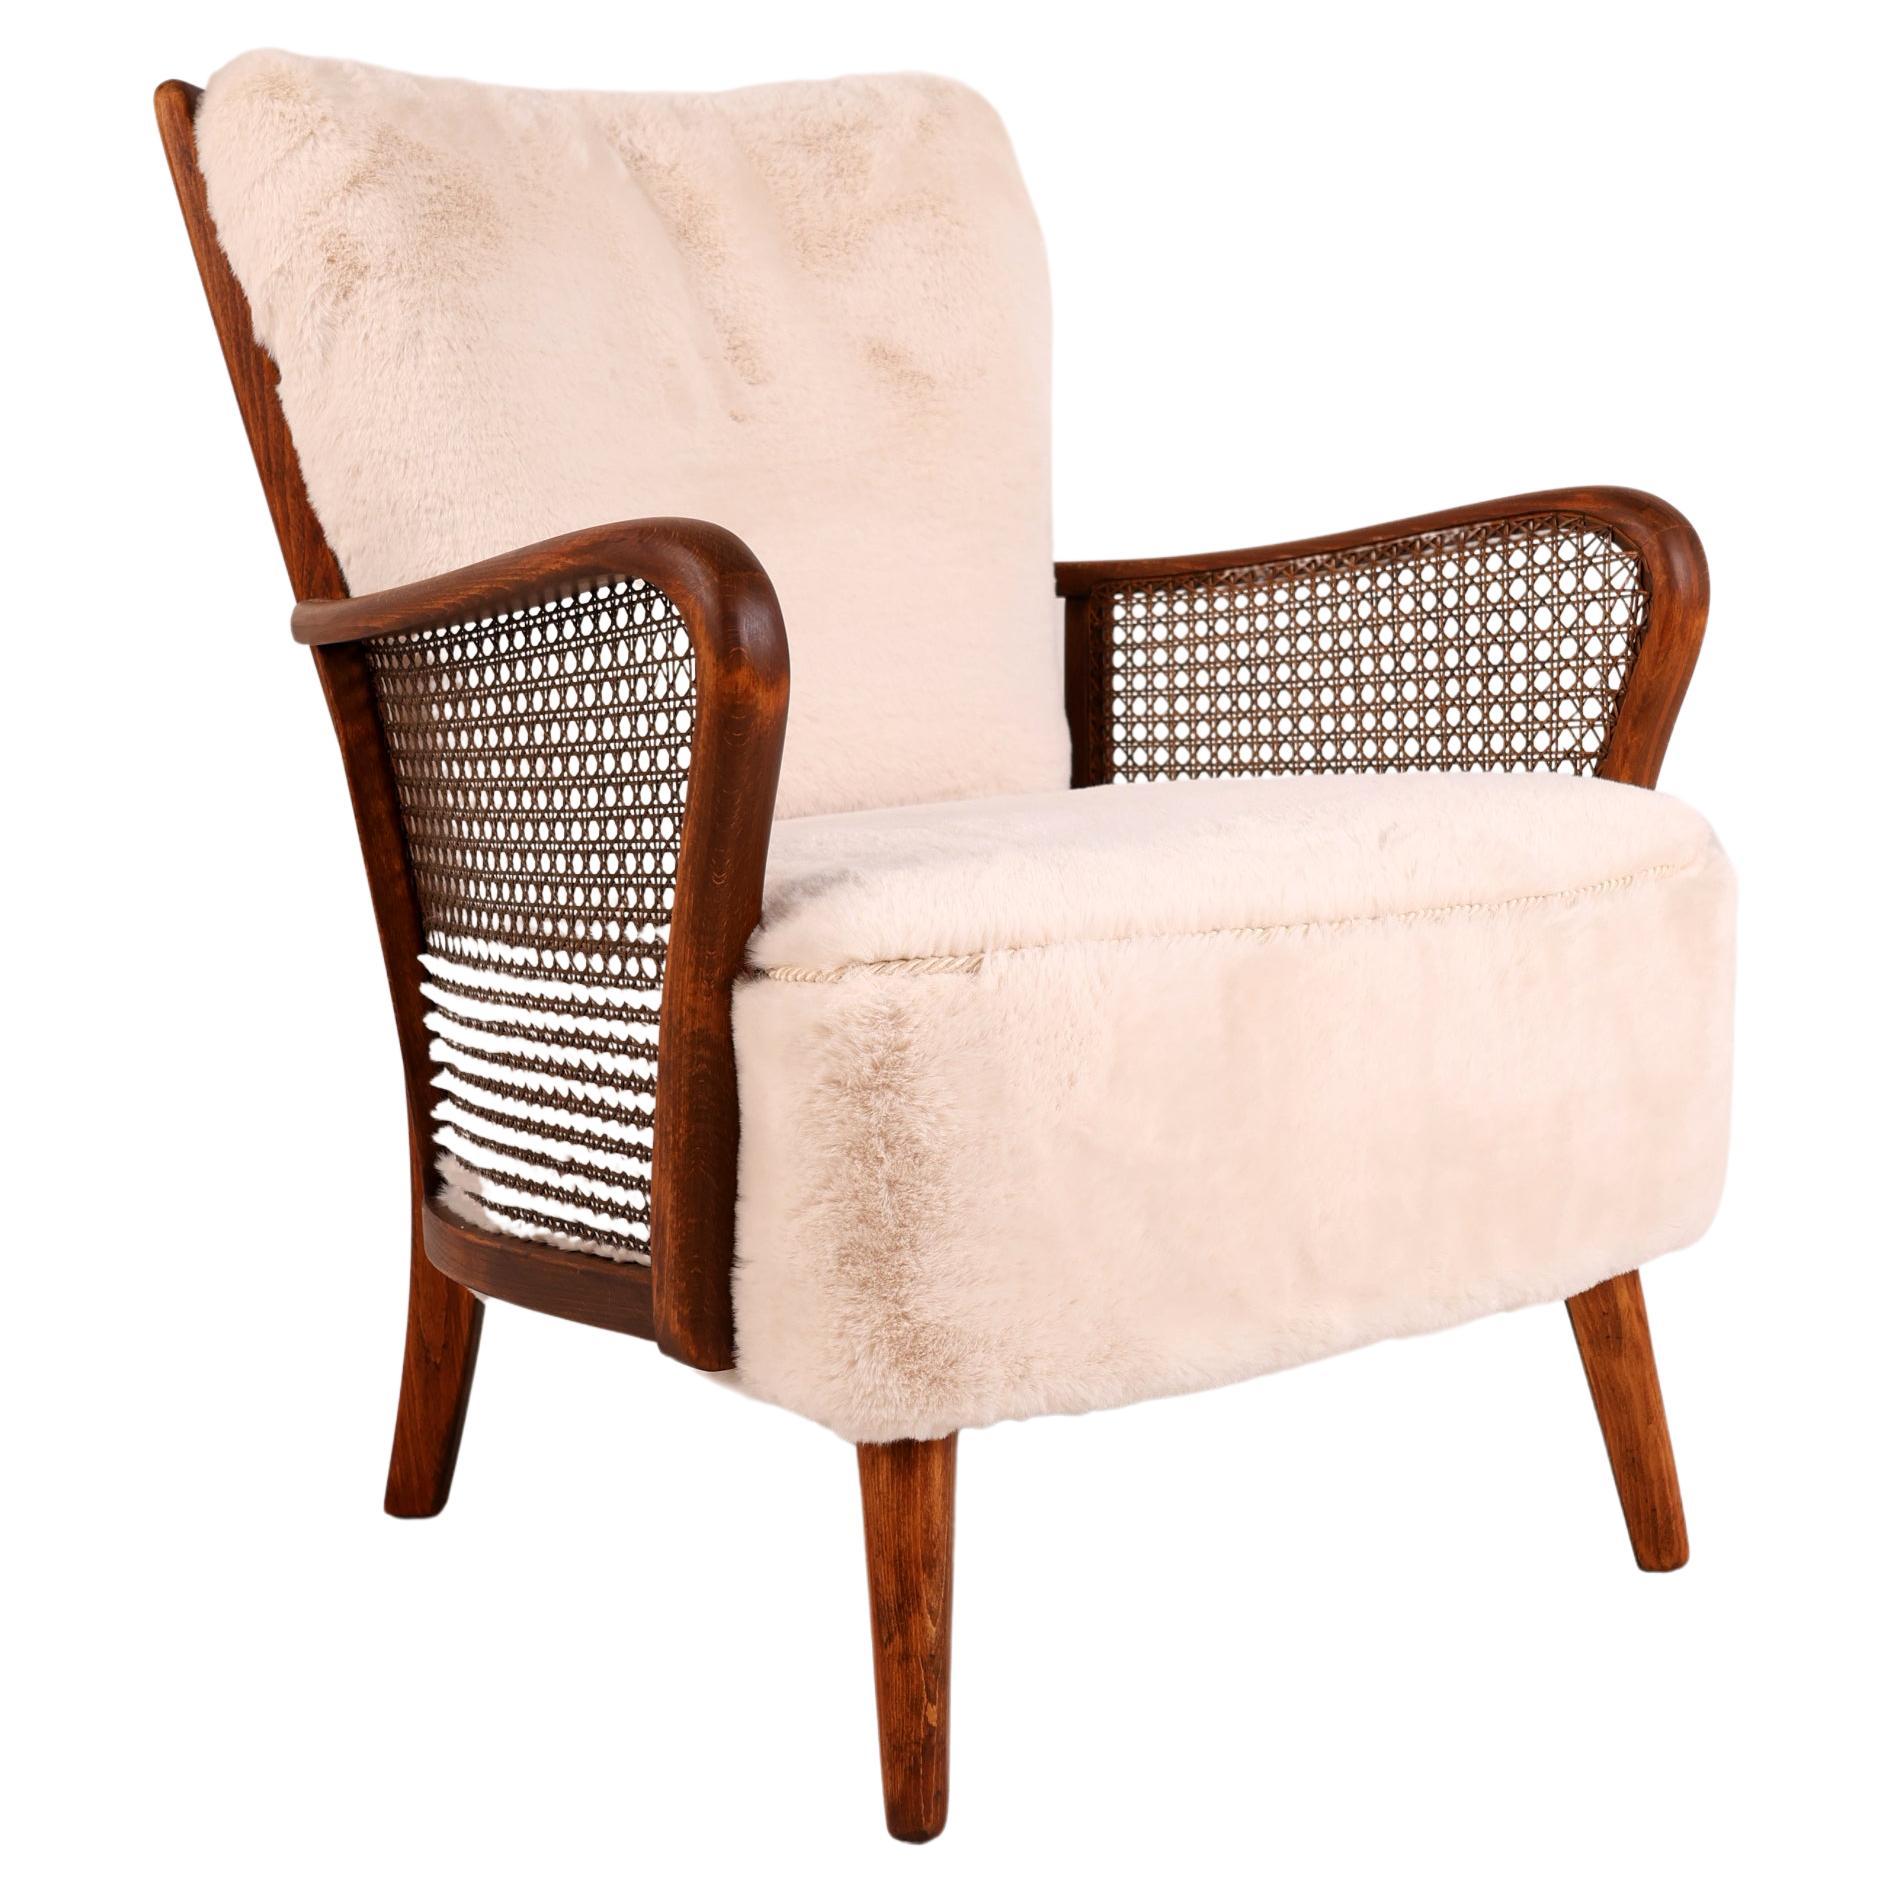 Mid 20th Century Lounge Chair in Rattan

Presenting a fantastic lounge chair from the 1950s, expertly crafted in beech and thoughtfully reupholstered. 

This comfortable chair will complement many interior styles. A modern, antique, classic,